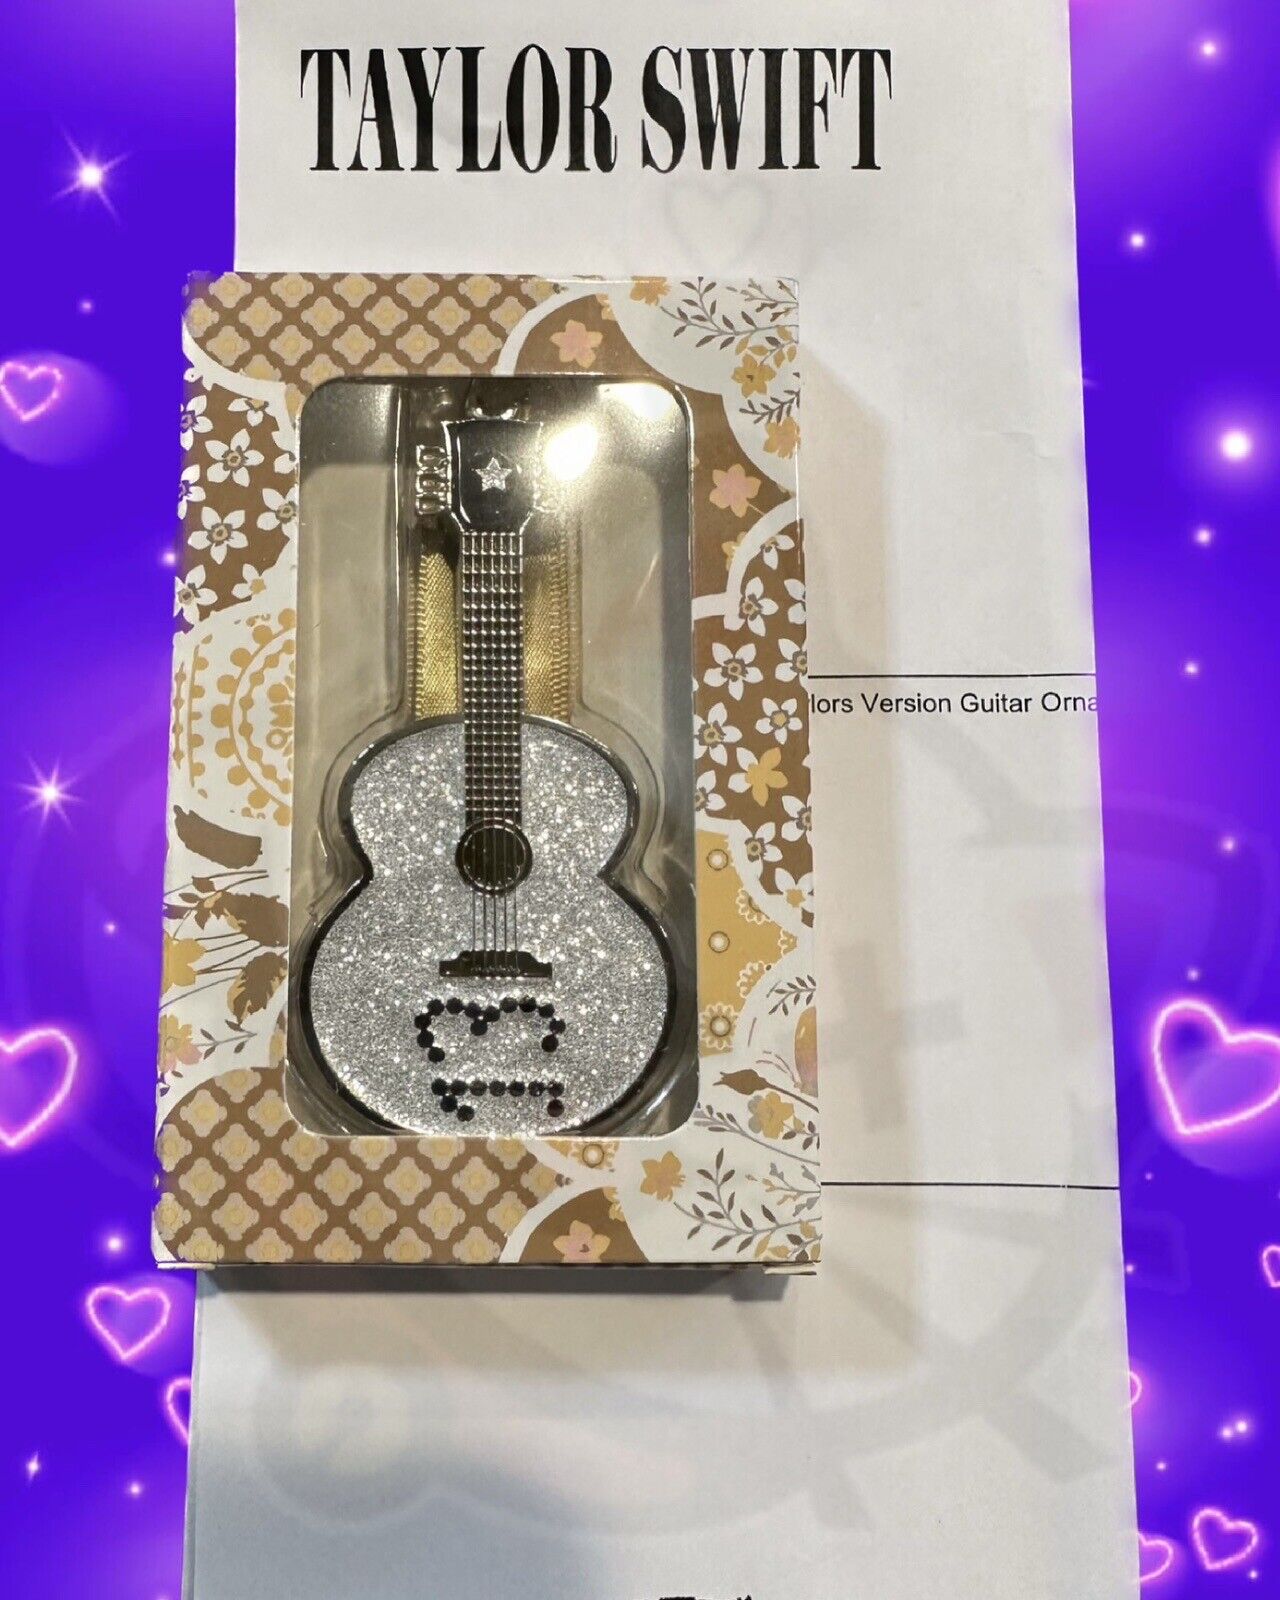 Taylor Swift Fearless (Taylor\'s Version) Guitar Ornament [IN HAND] 🆕 🎄 🎸